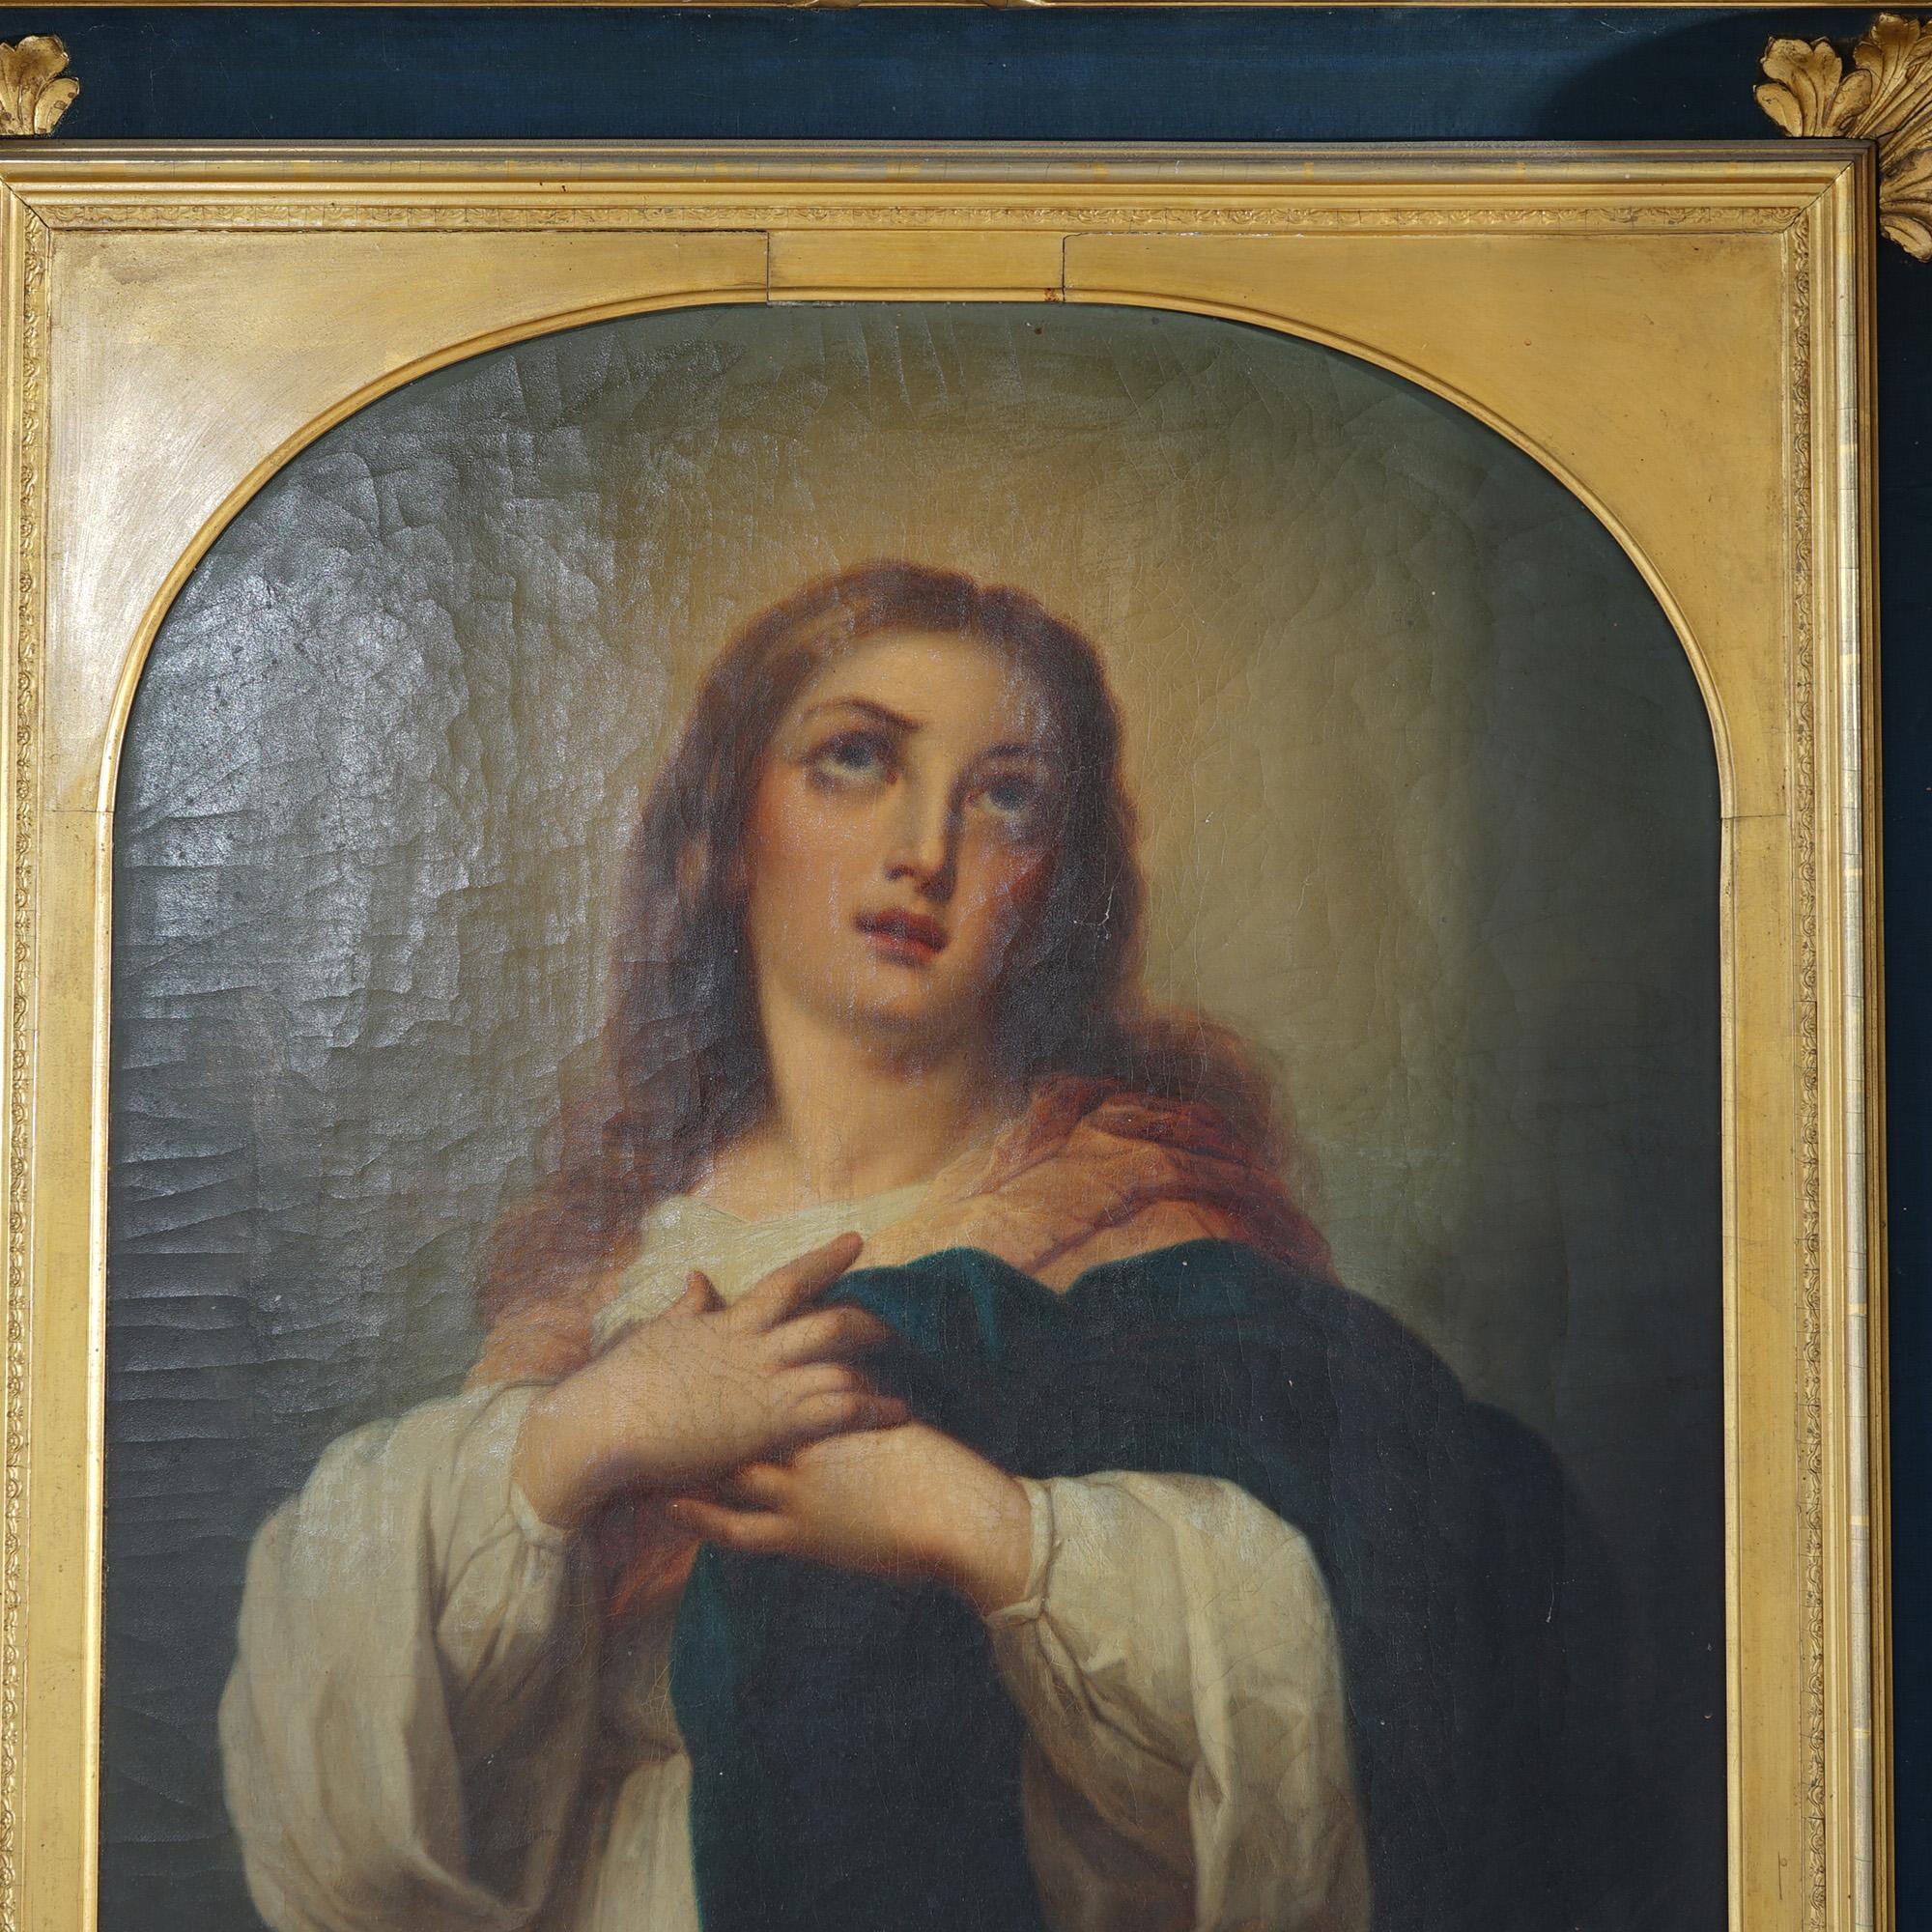 A antique painting offers oil oil on canvas portrait of Mary Magdalene, framed, 19th C

Dimensions - overall 41.25